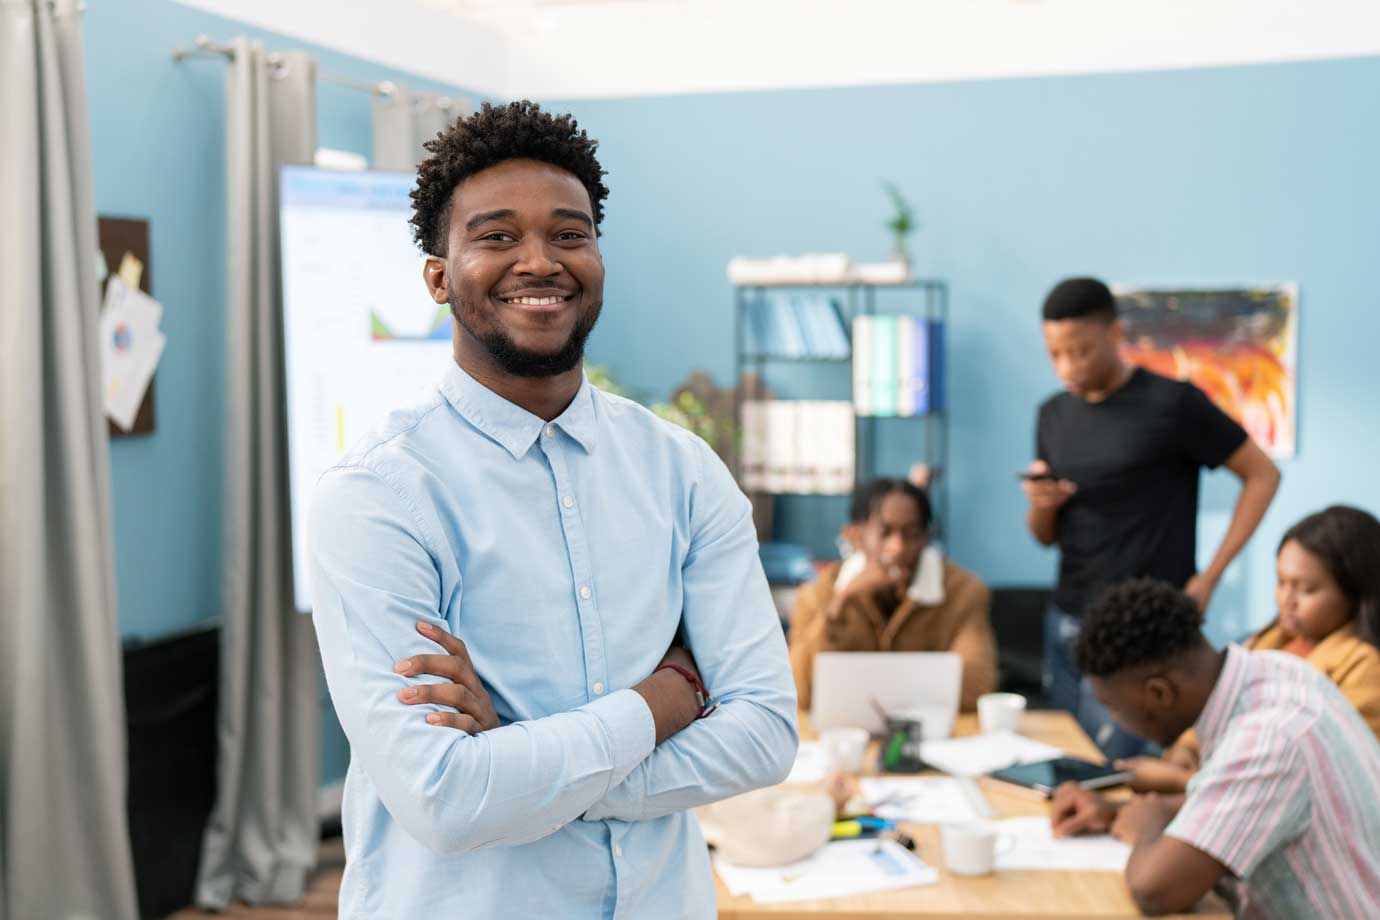 Young man smiling in a room full of colleagues working on a project